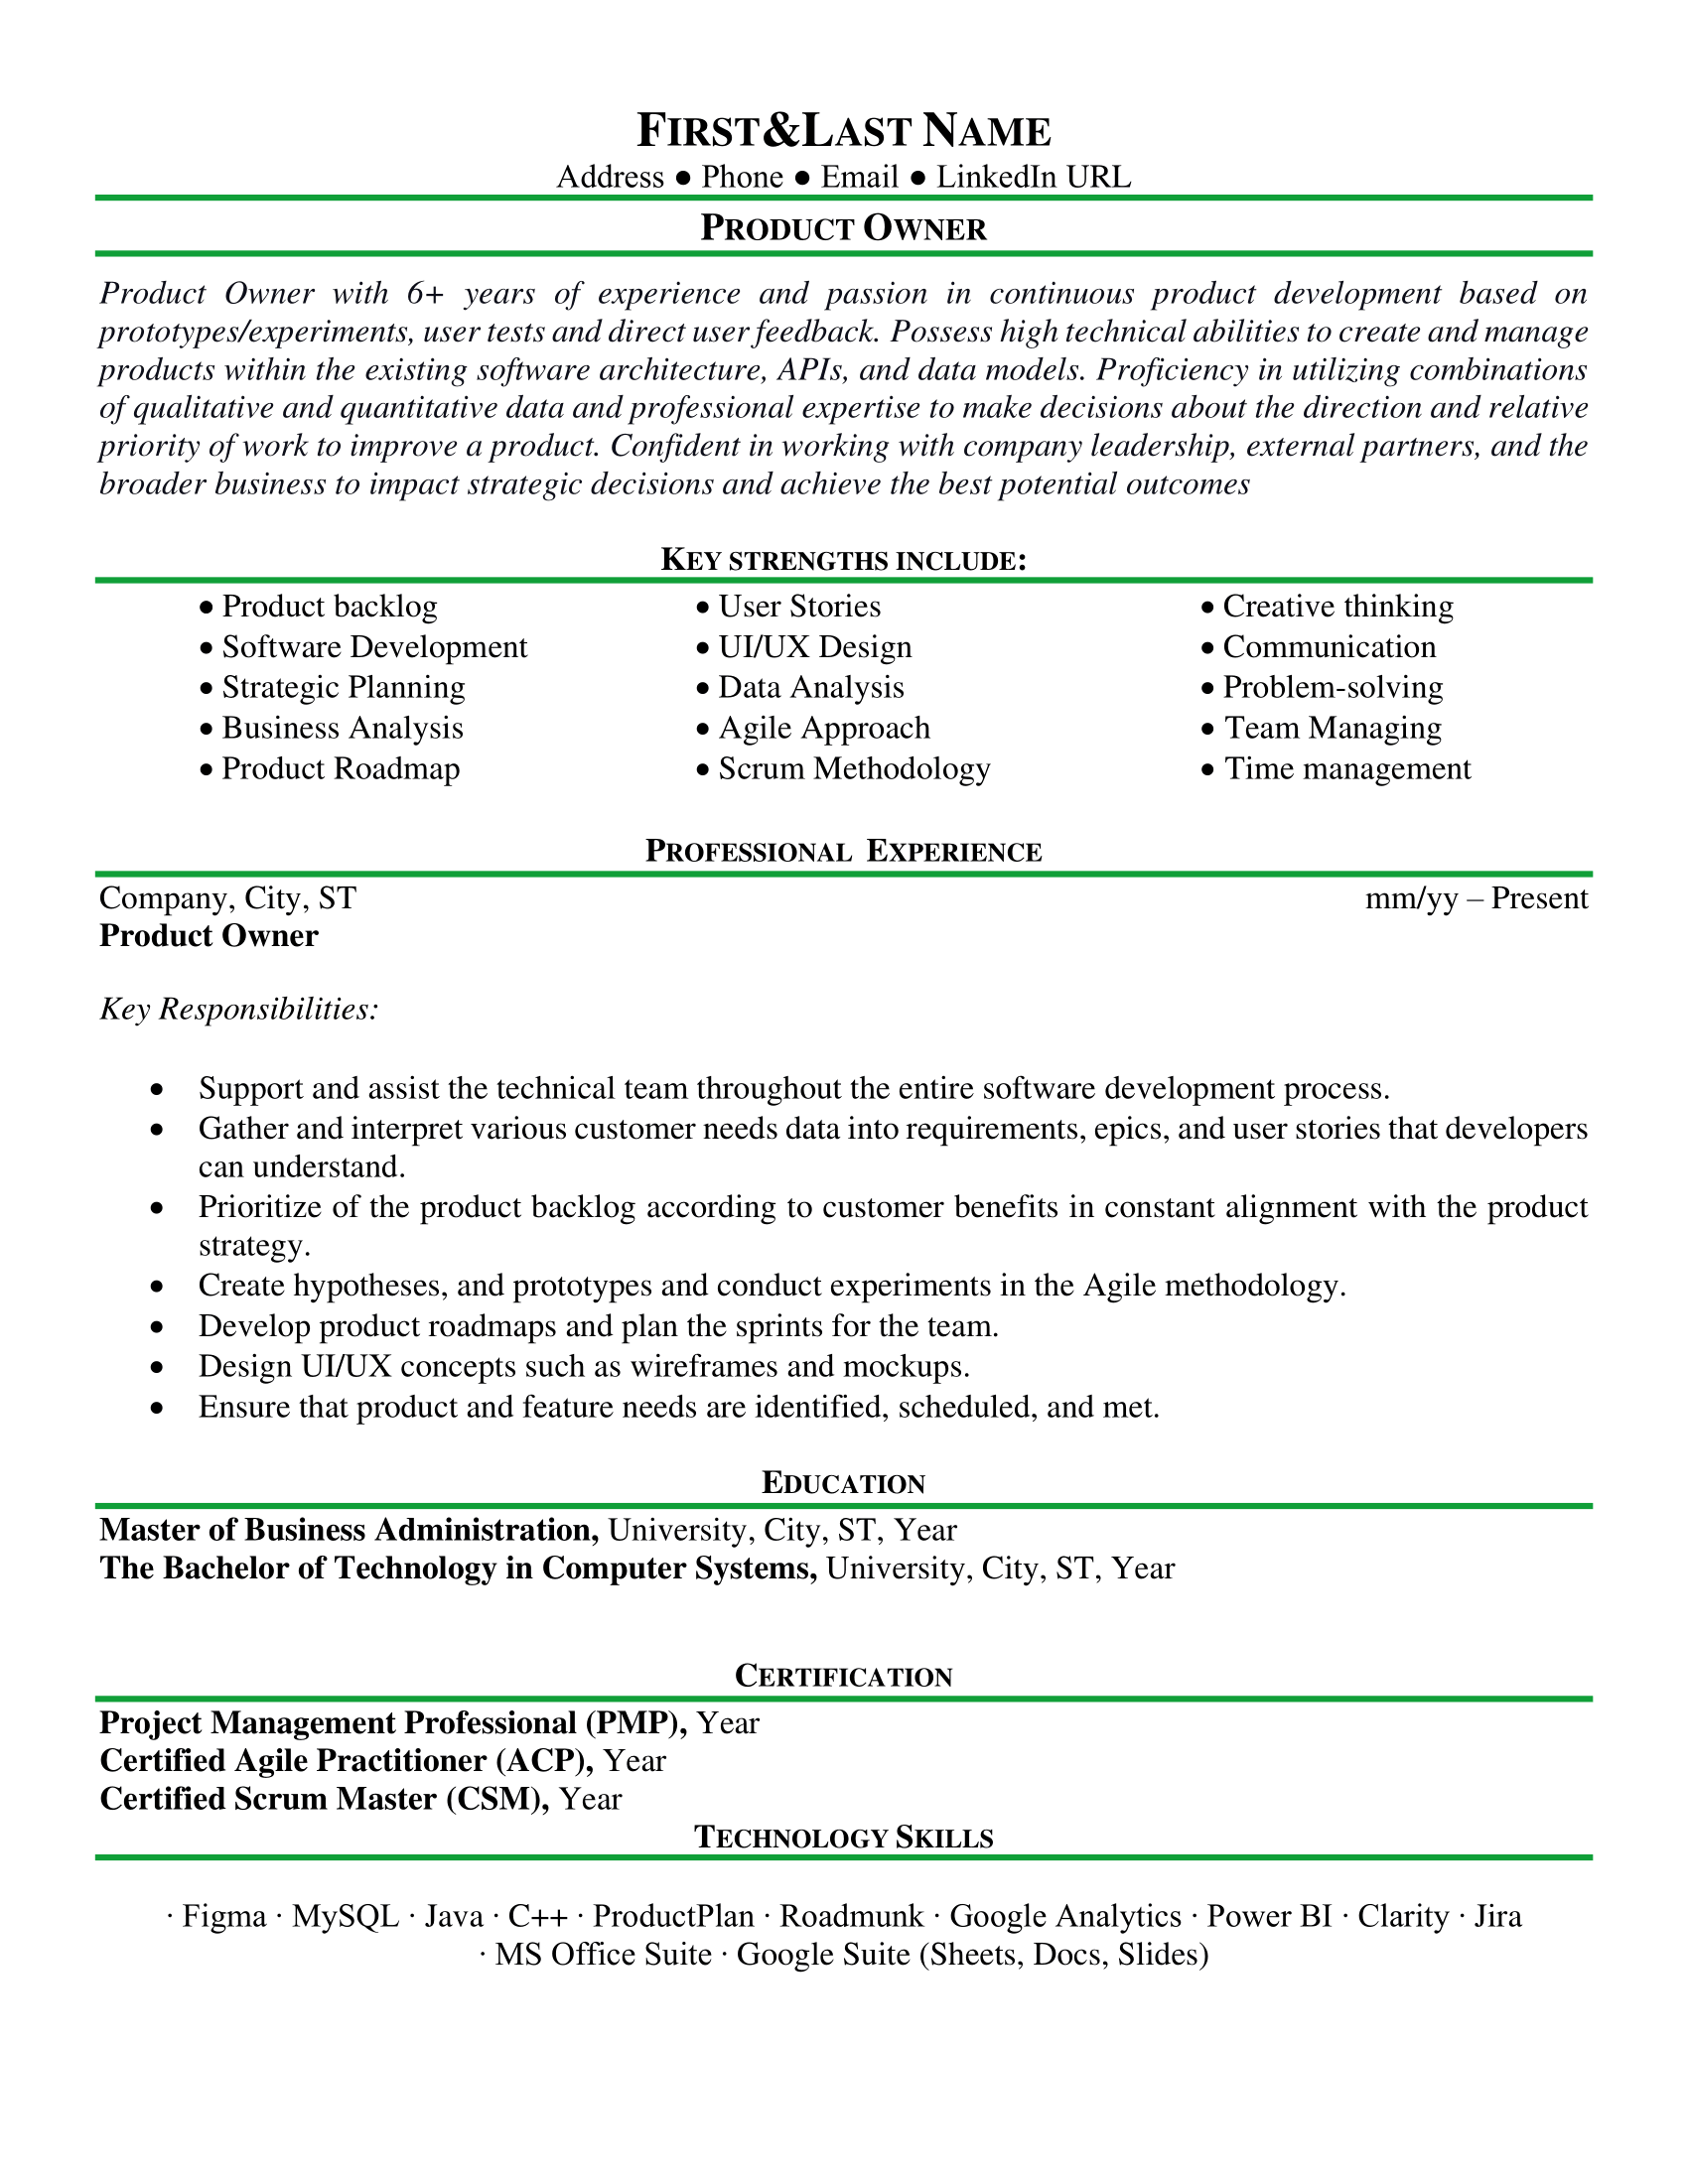 Product Owner Resume Sample